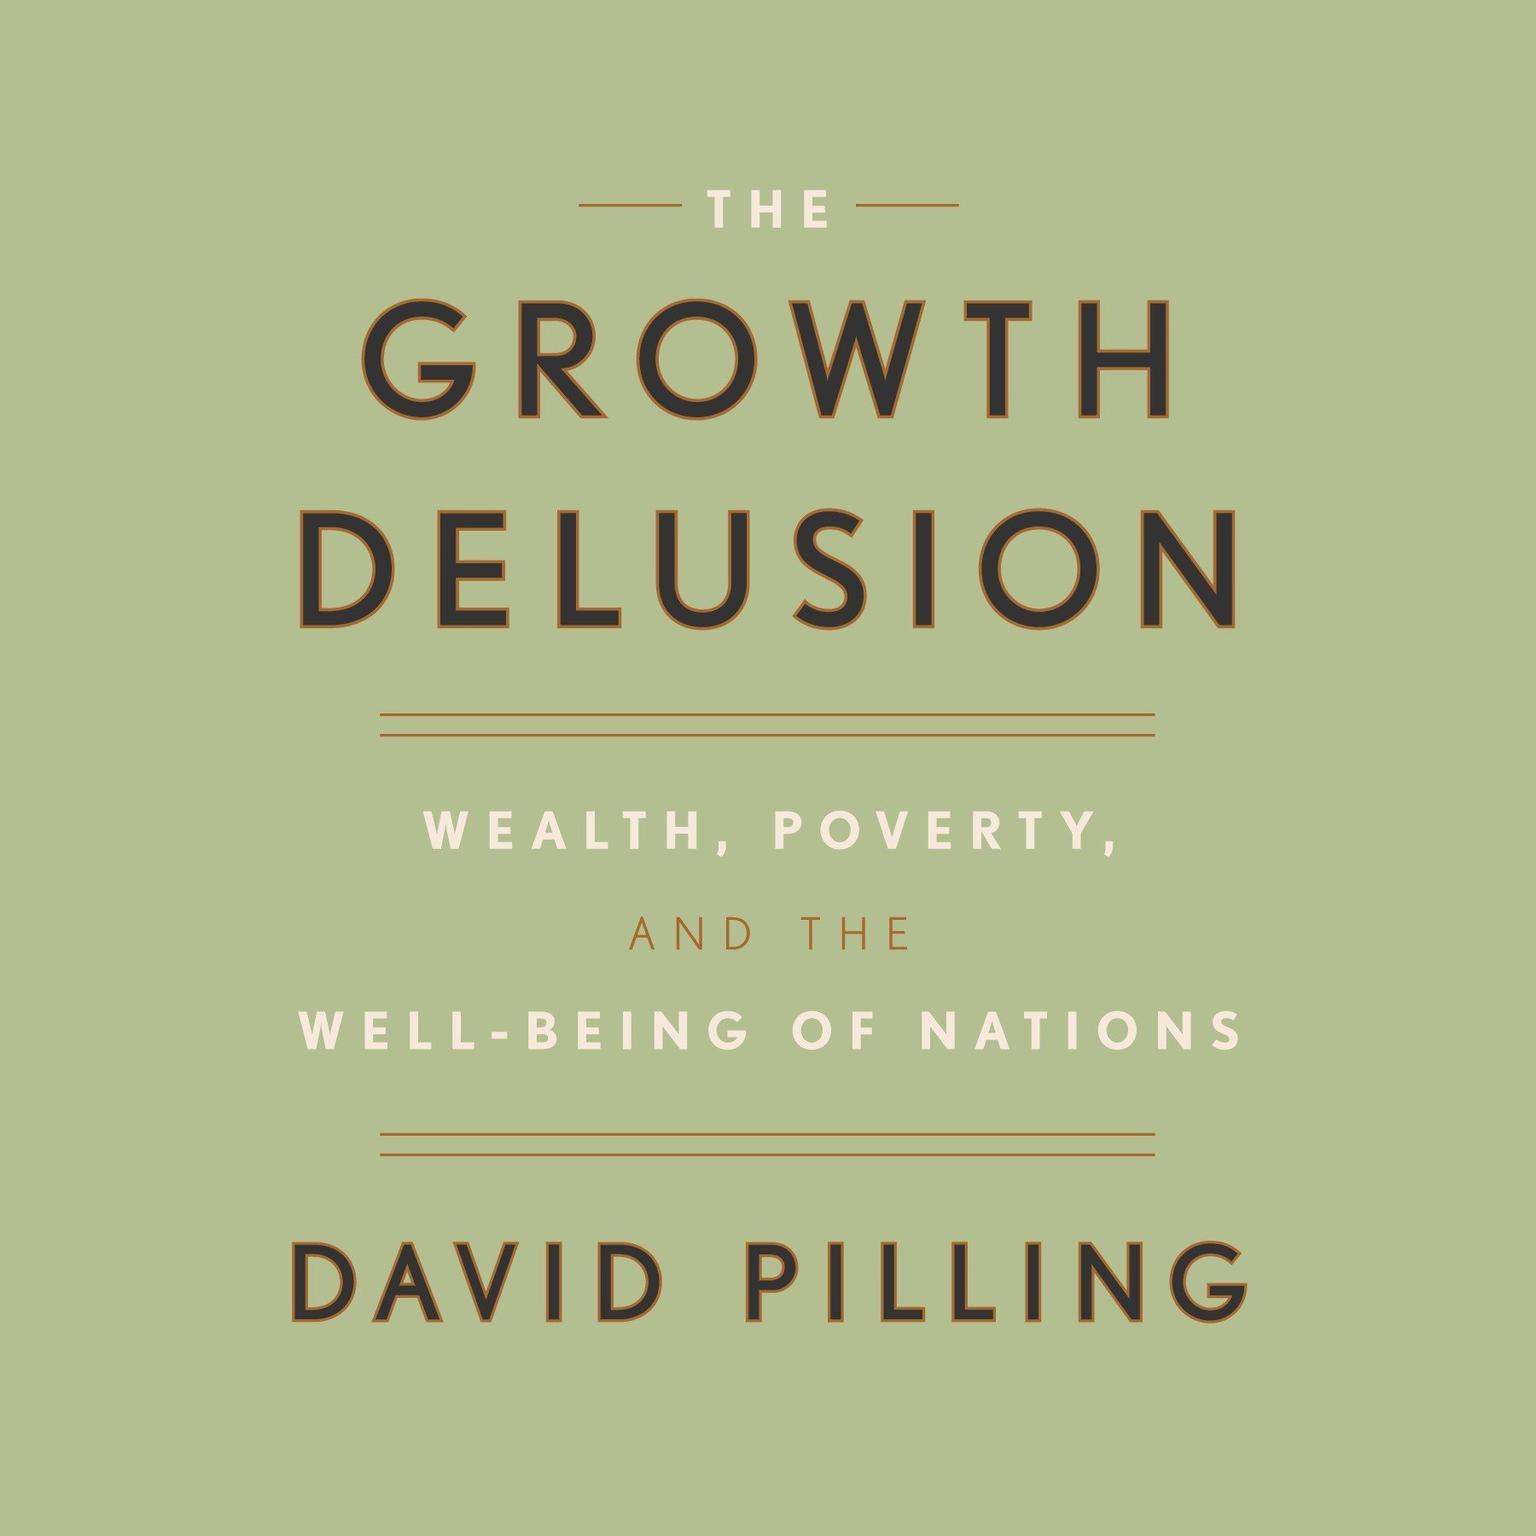 The Growth Delusion: Wealth, Poverty, and the Well-Being of Nations Audiobook, by David Pilling